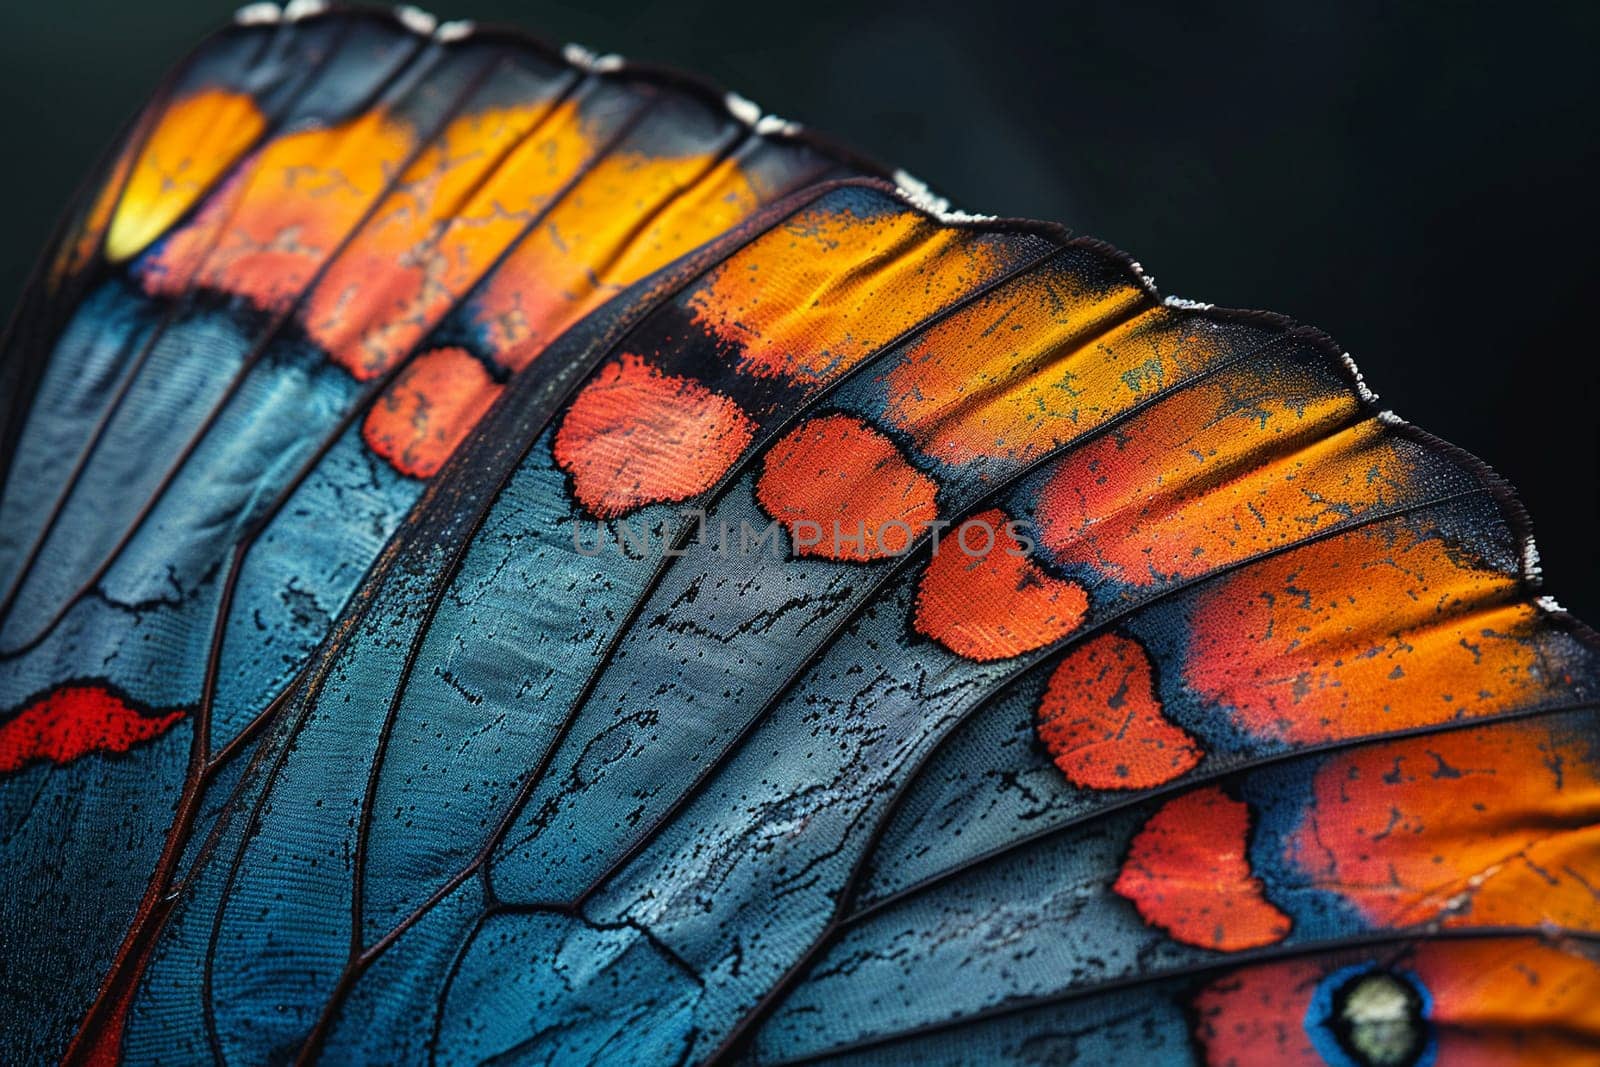 Close-up of a vibrant butterfly wing, for nature and beauty inspired projects.